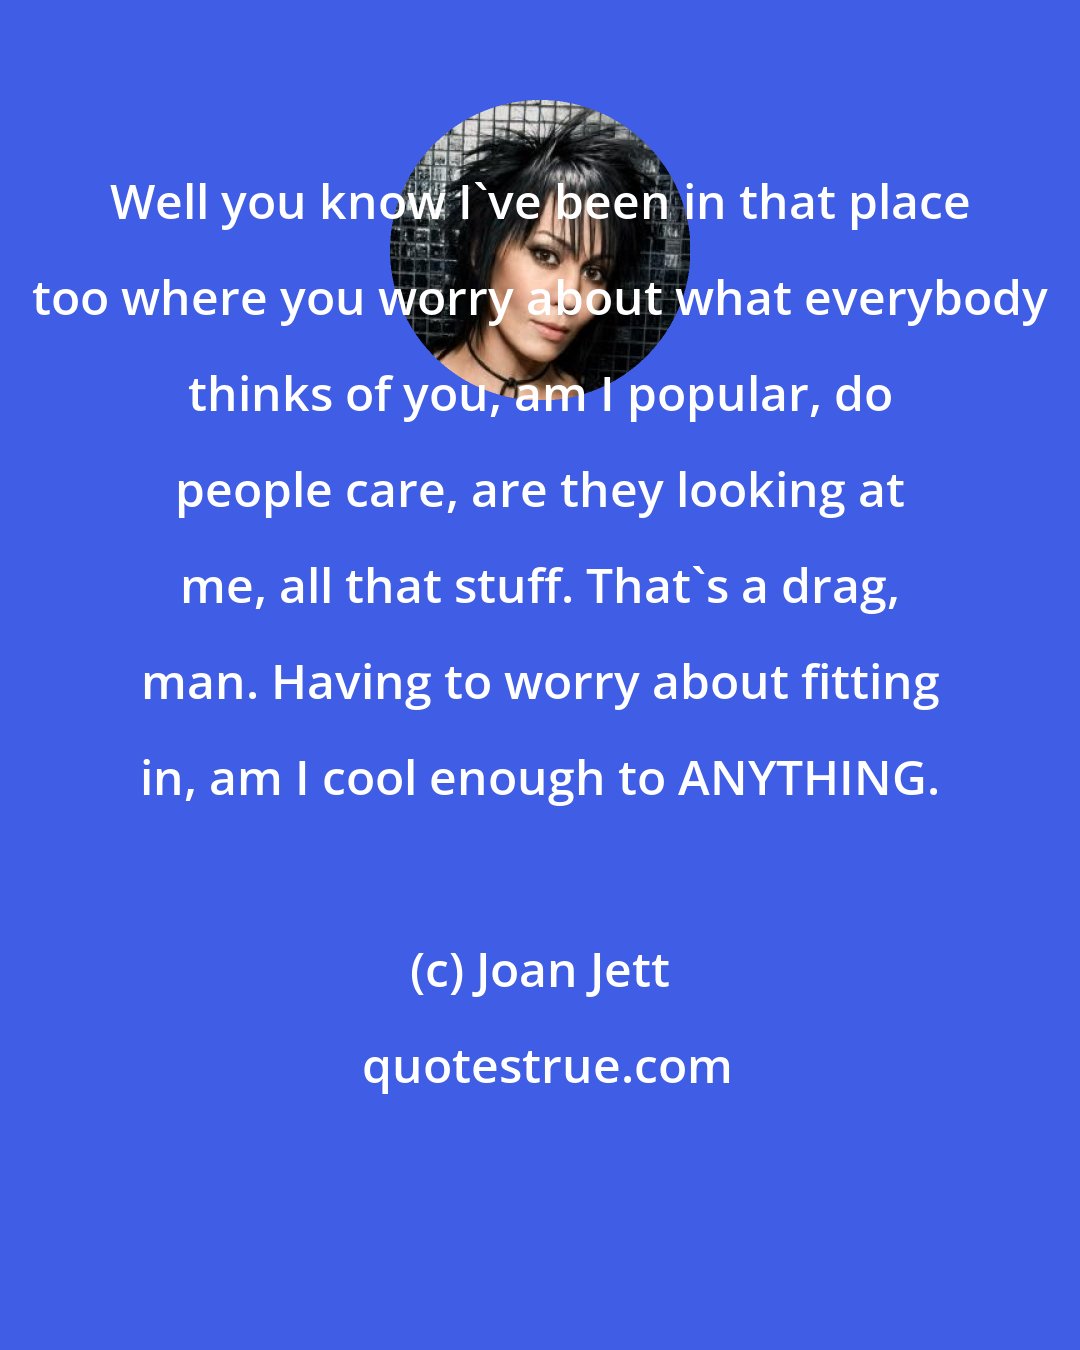 Joan Jett: Well you know I've been in that place too where you worry about what everybody thinks of you, am I popular, do people care, are they looking at me, all that stuff. That's a drag, man. Having to worry about fitting in, am I cool enough to ANYTHING.